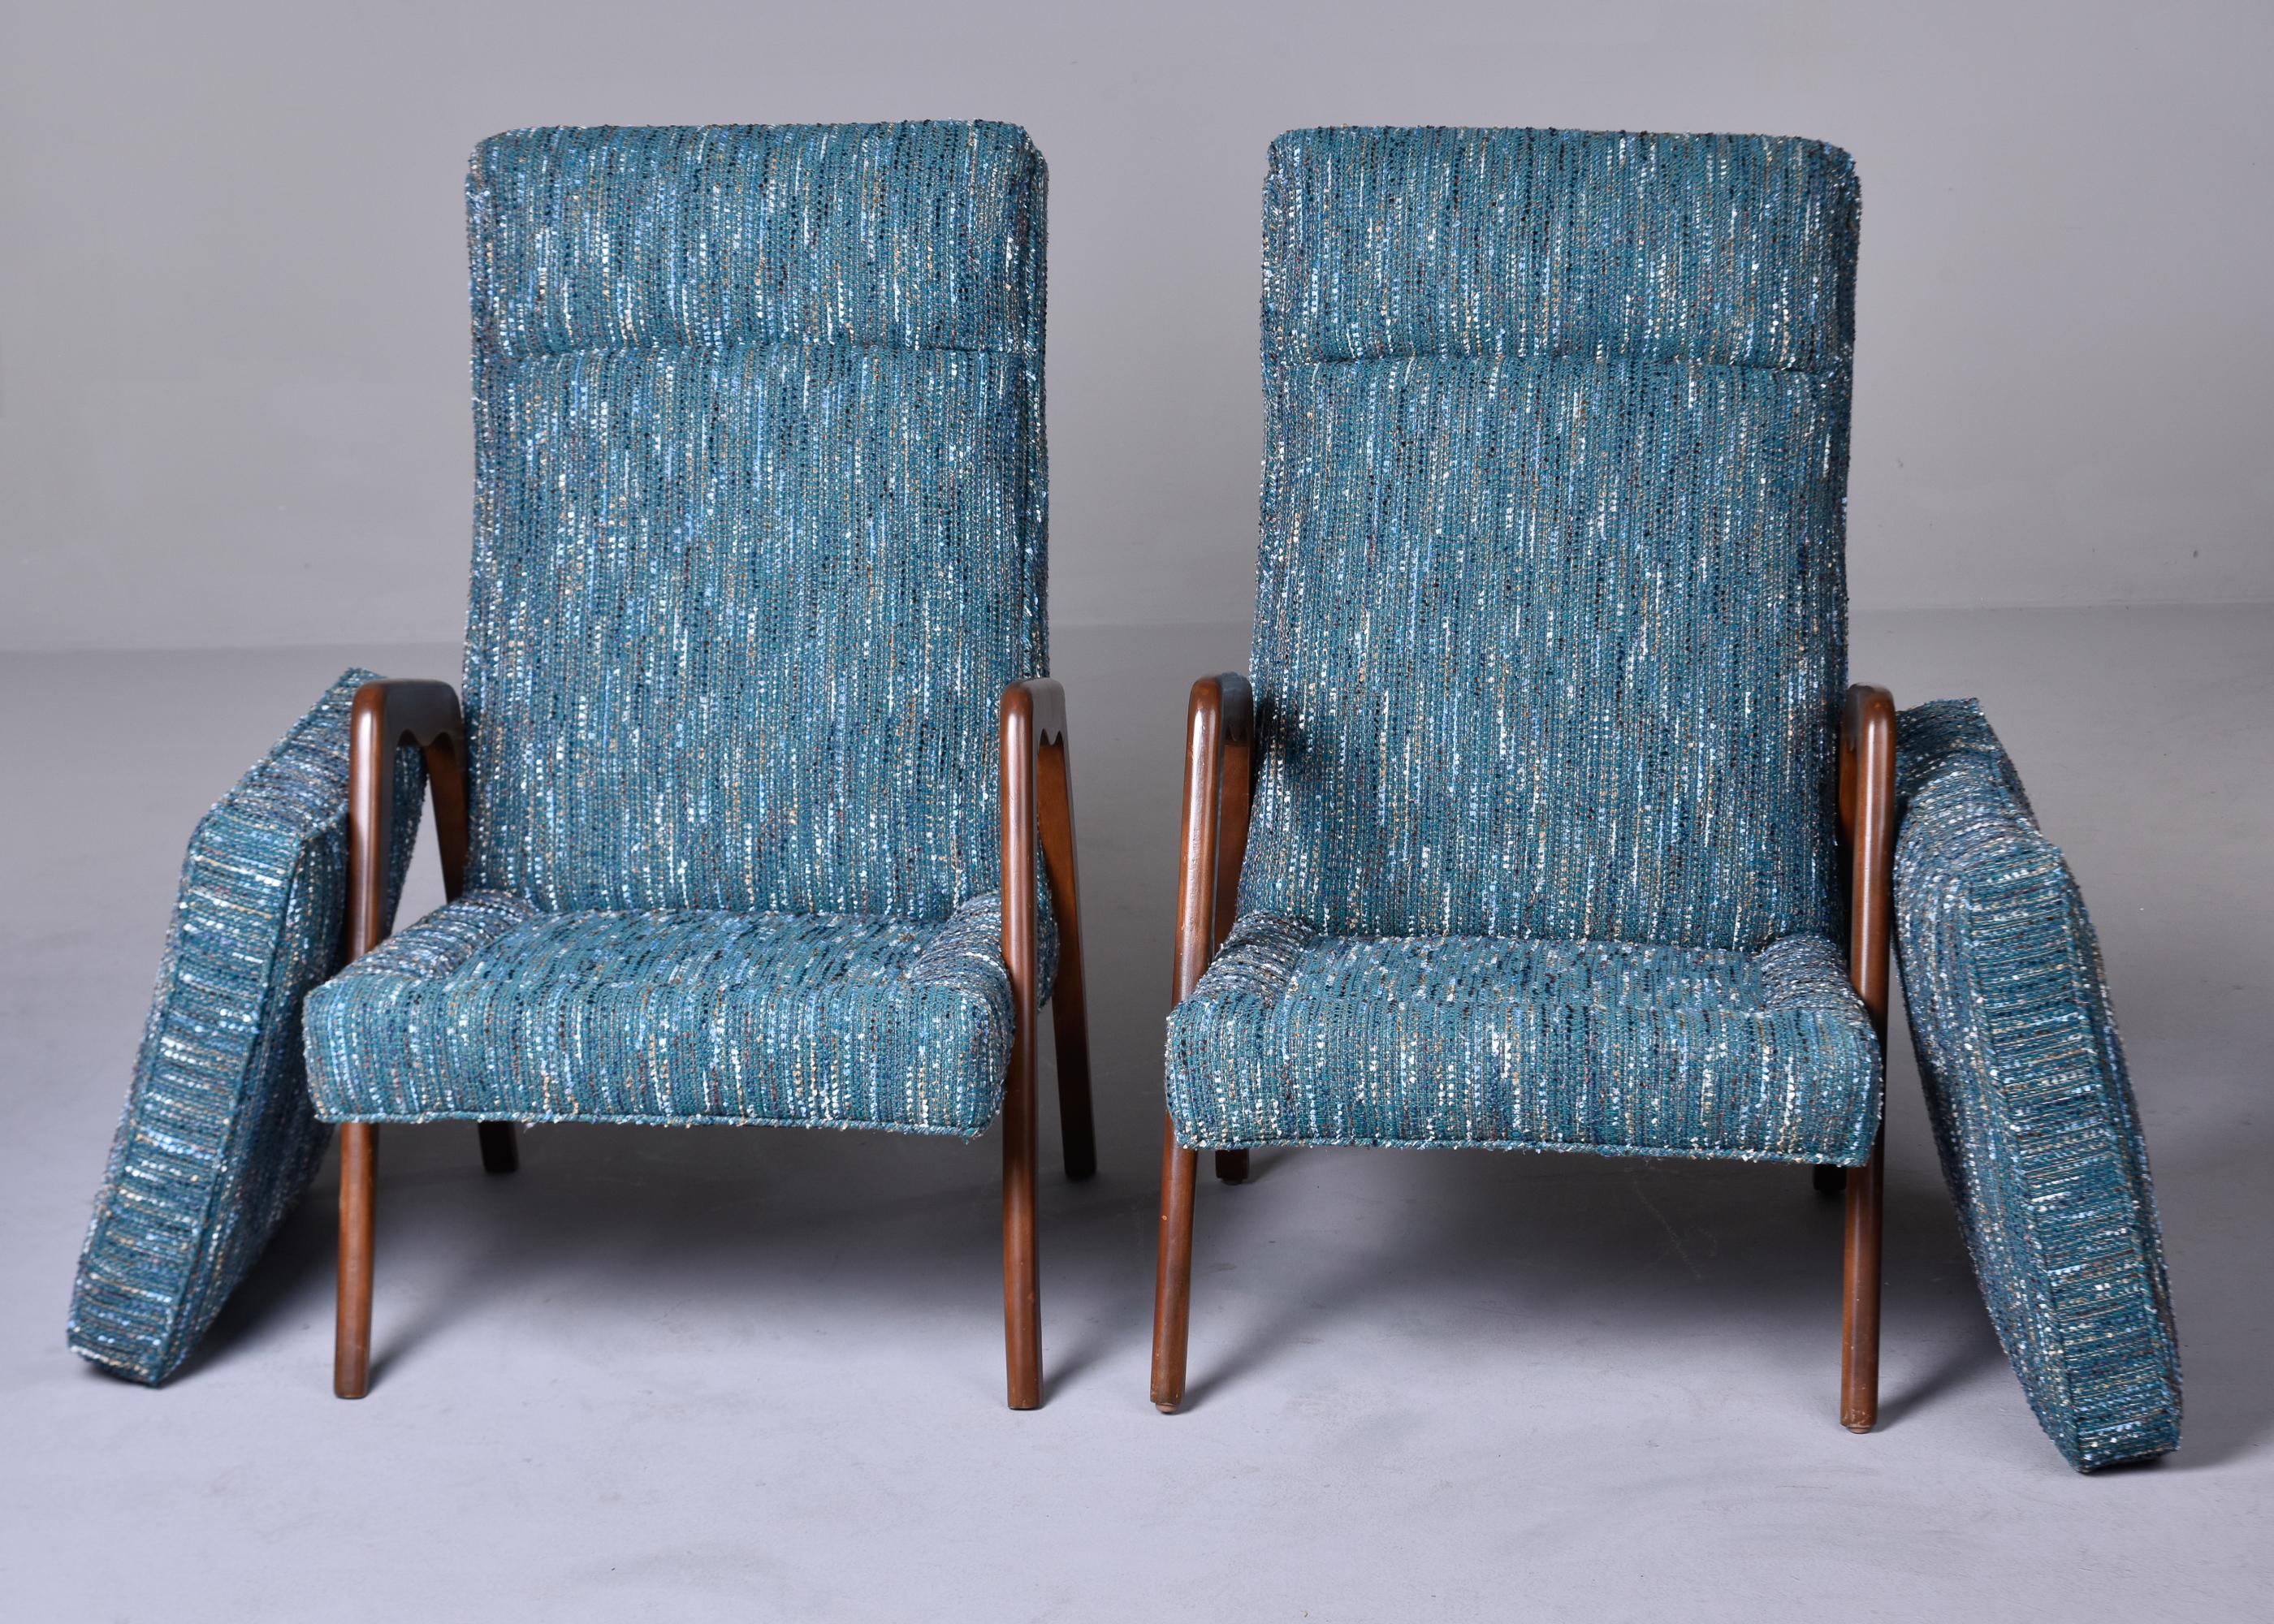 Pair of Mid-Century Italian Chairs with New Teal Tweed Upholstery For Sale 7